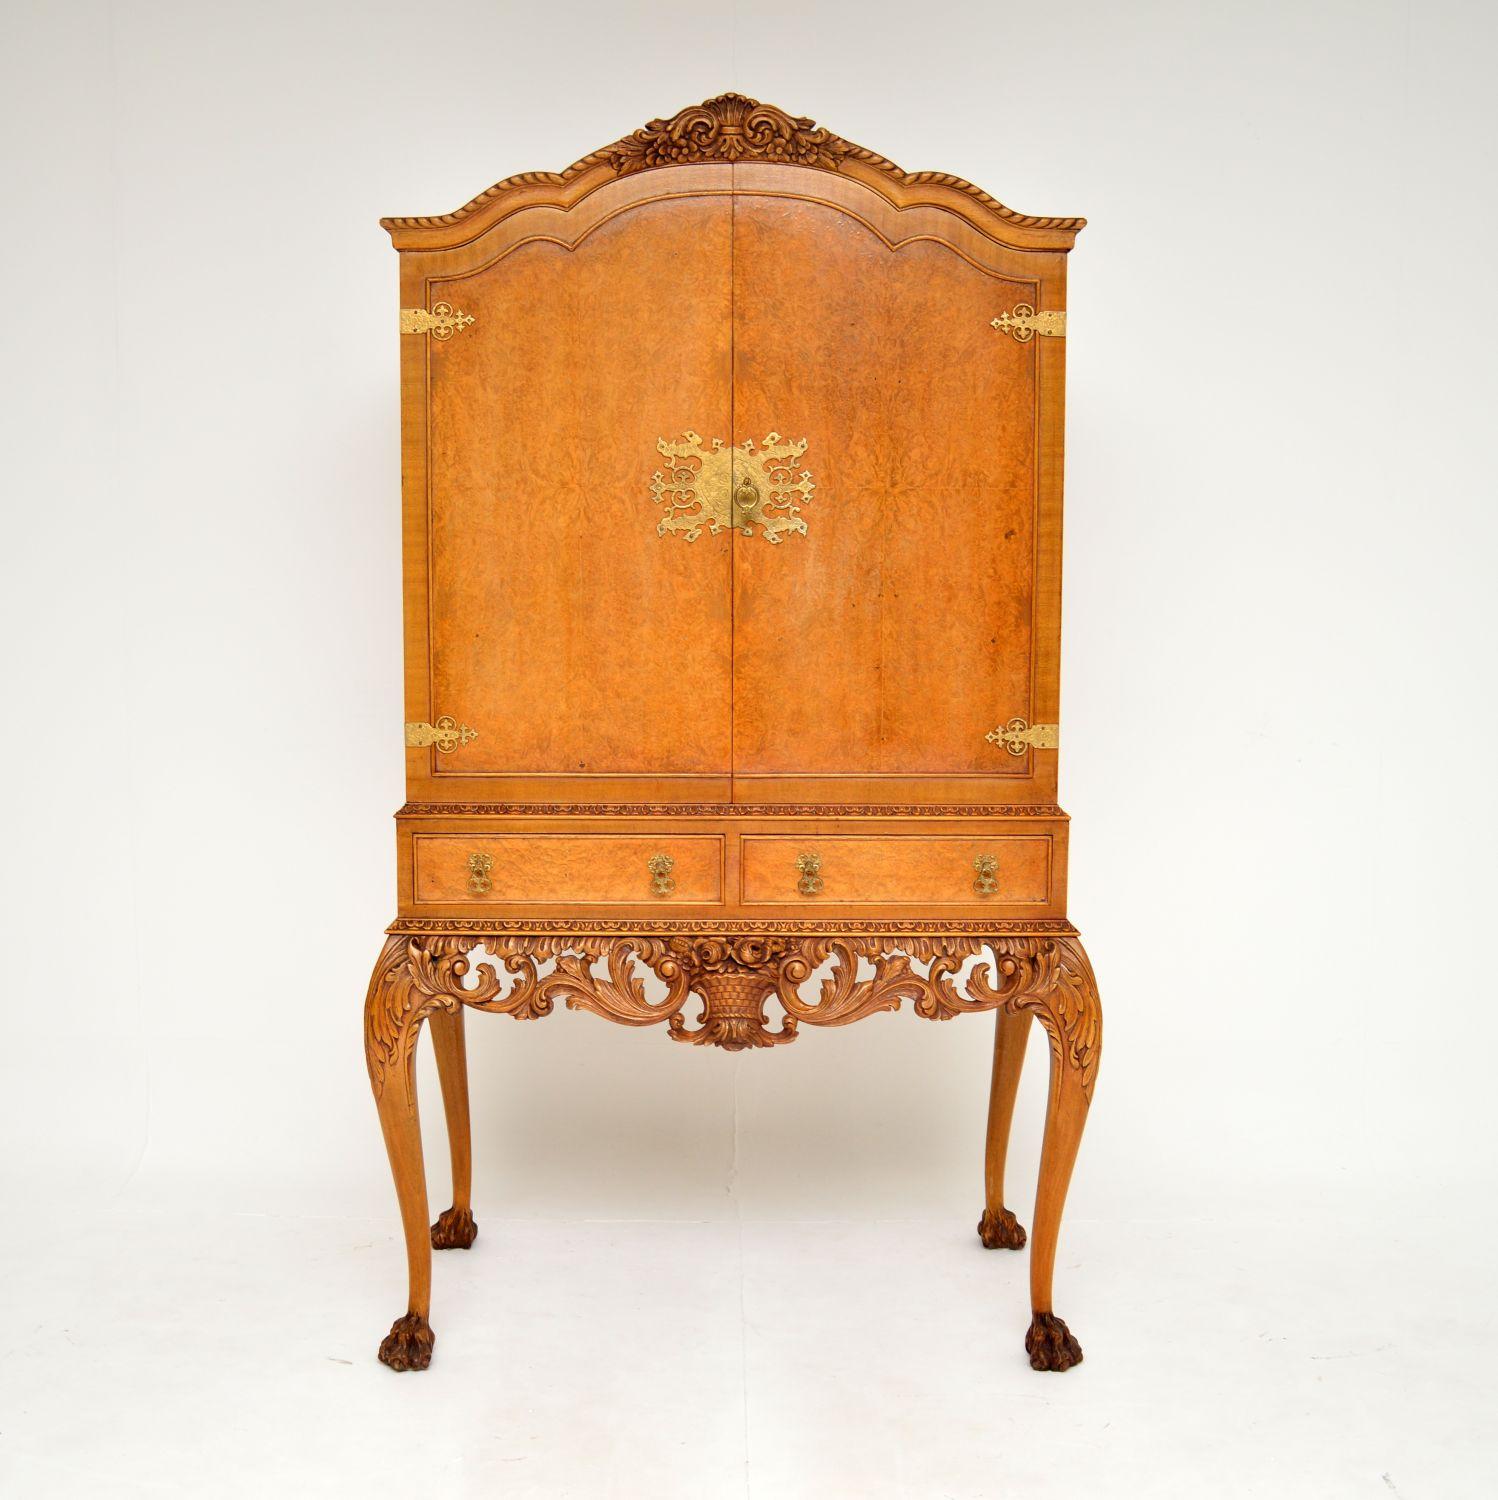 An exceptional antique burr walnut cocktail drinks cabinet in the Queen Anne style. This was made in England, it dates from around the 1920-30’s.

It is of amazing quality with some extremely beautiful and useful features.

There is fine floral